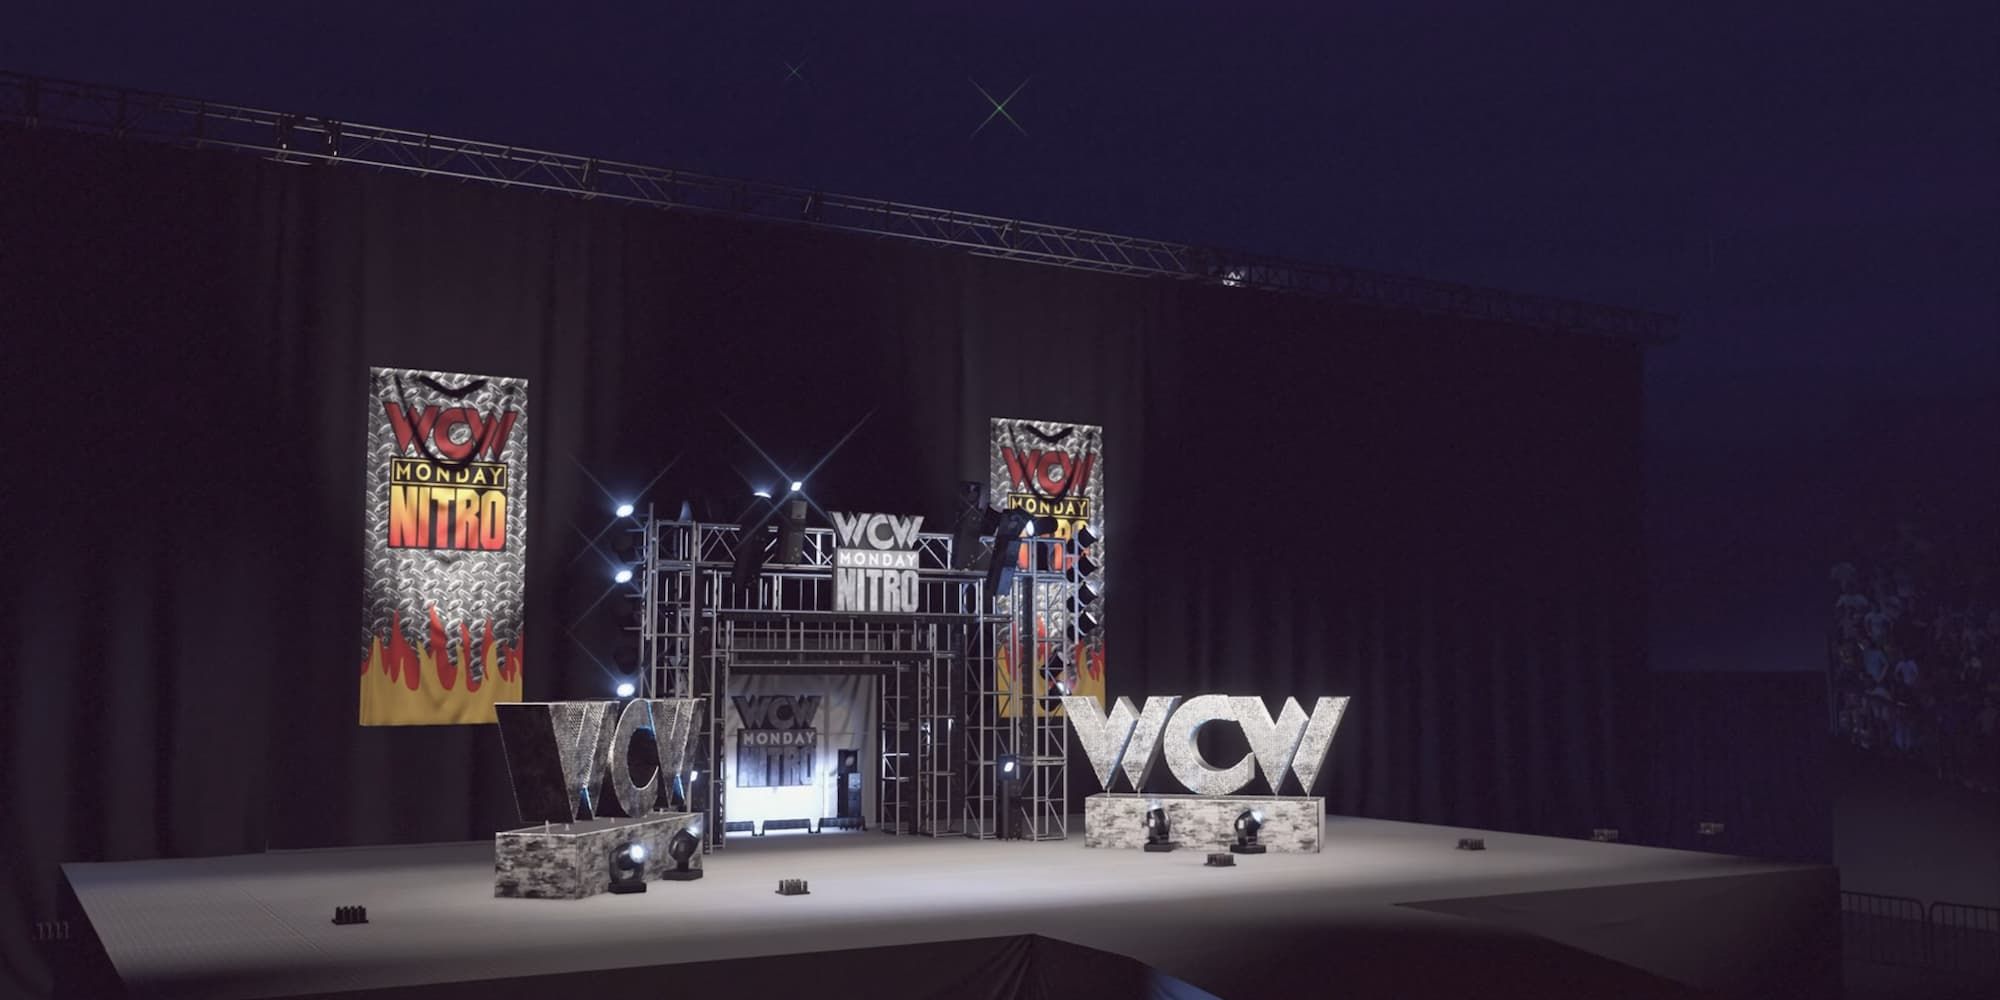 The WCW Monday Nitro arena in WWE 2K23 two massive metallic WCW logos on either side of the small entrance area.